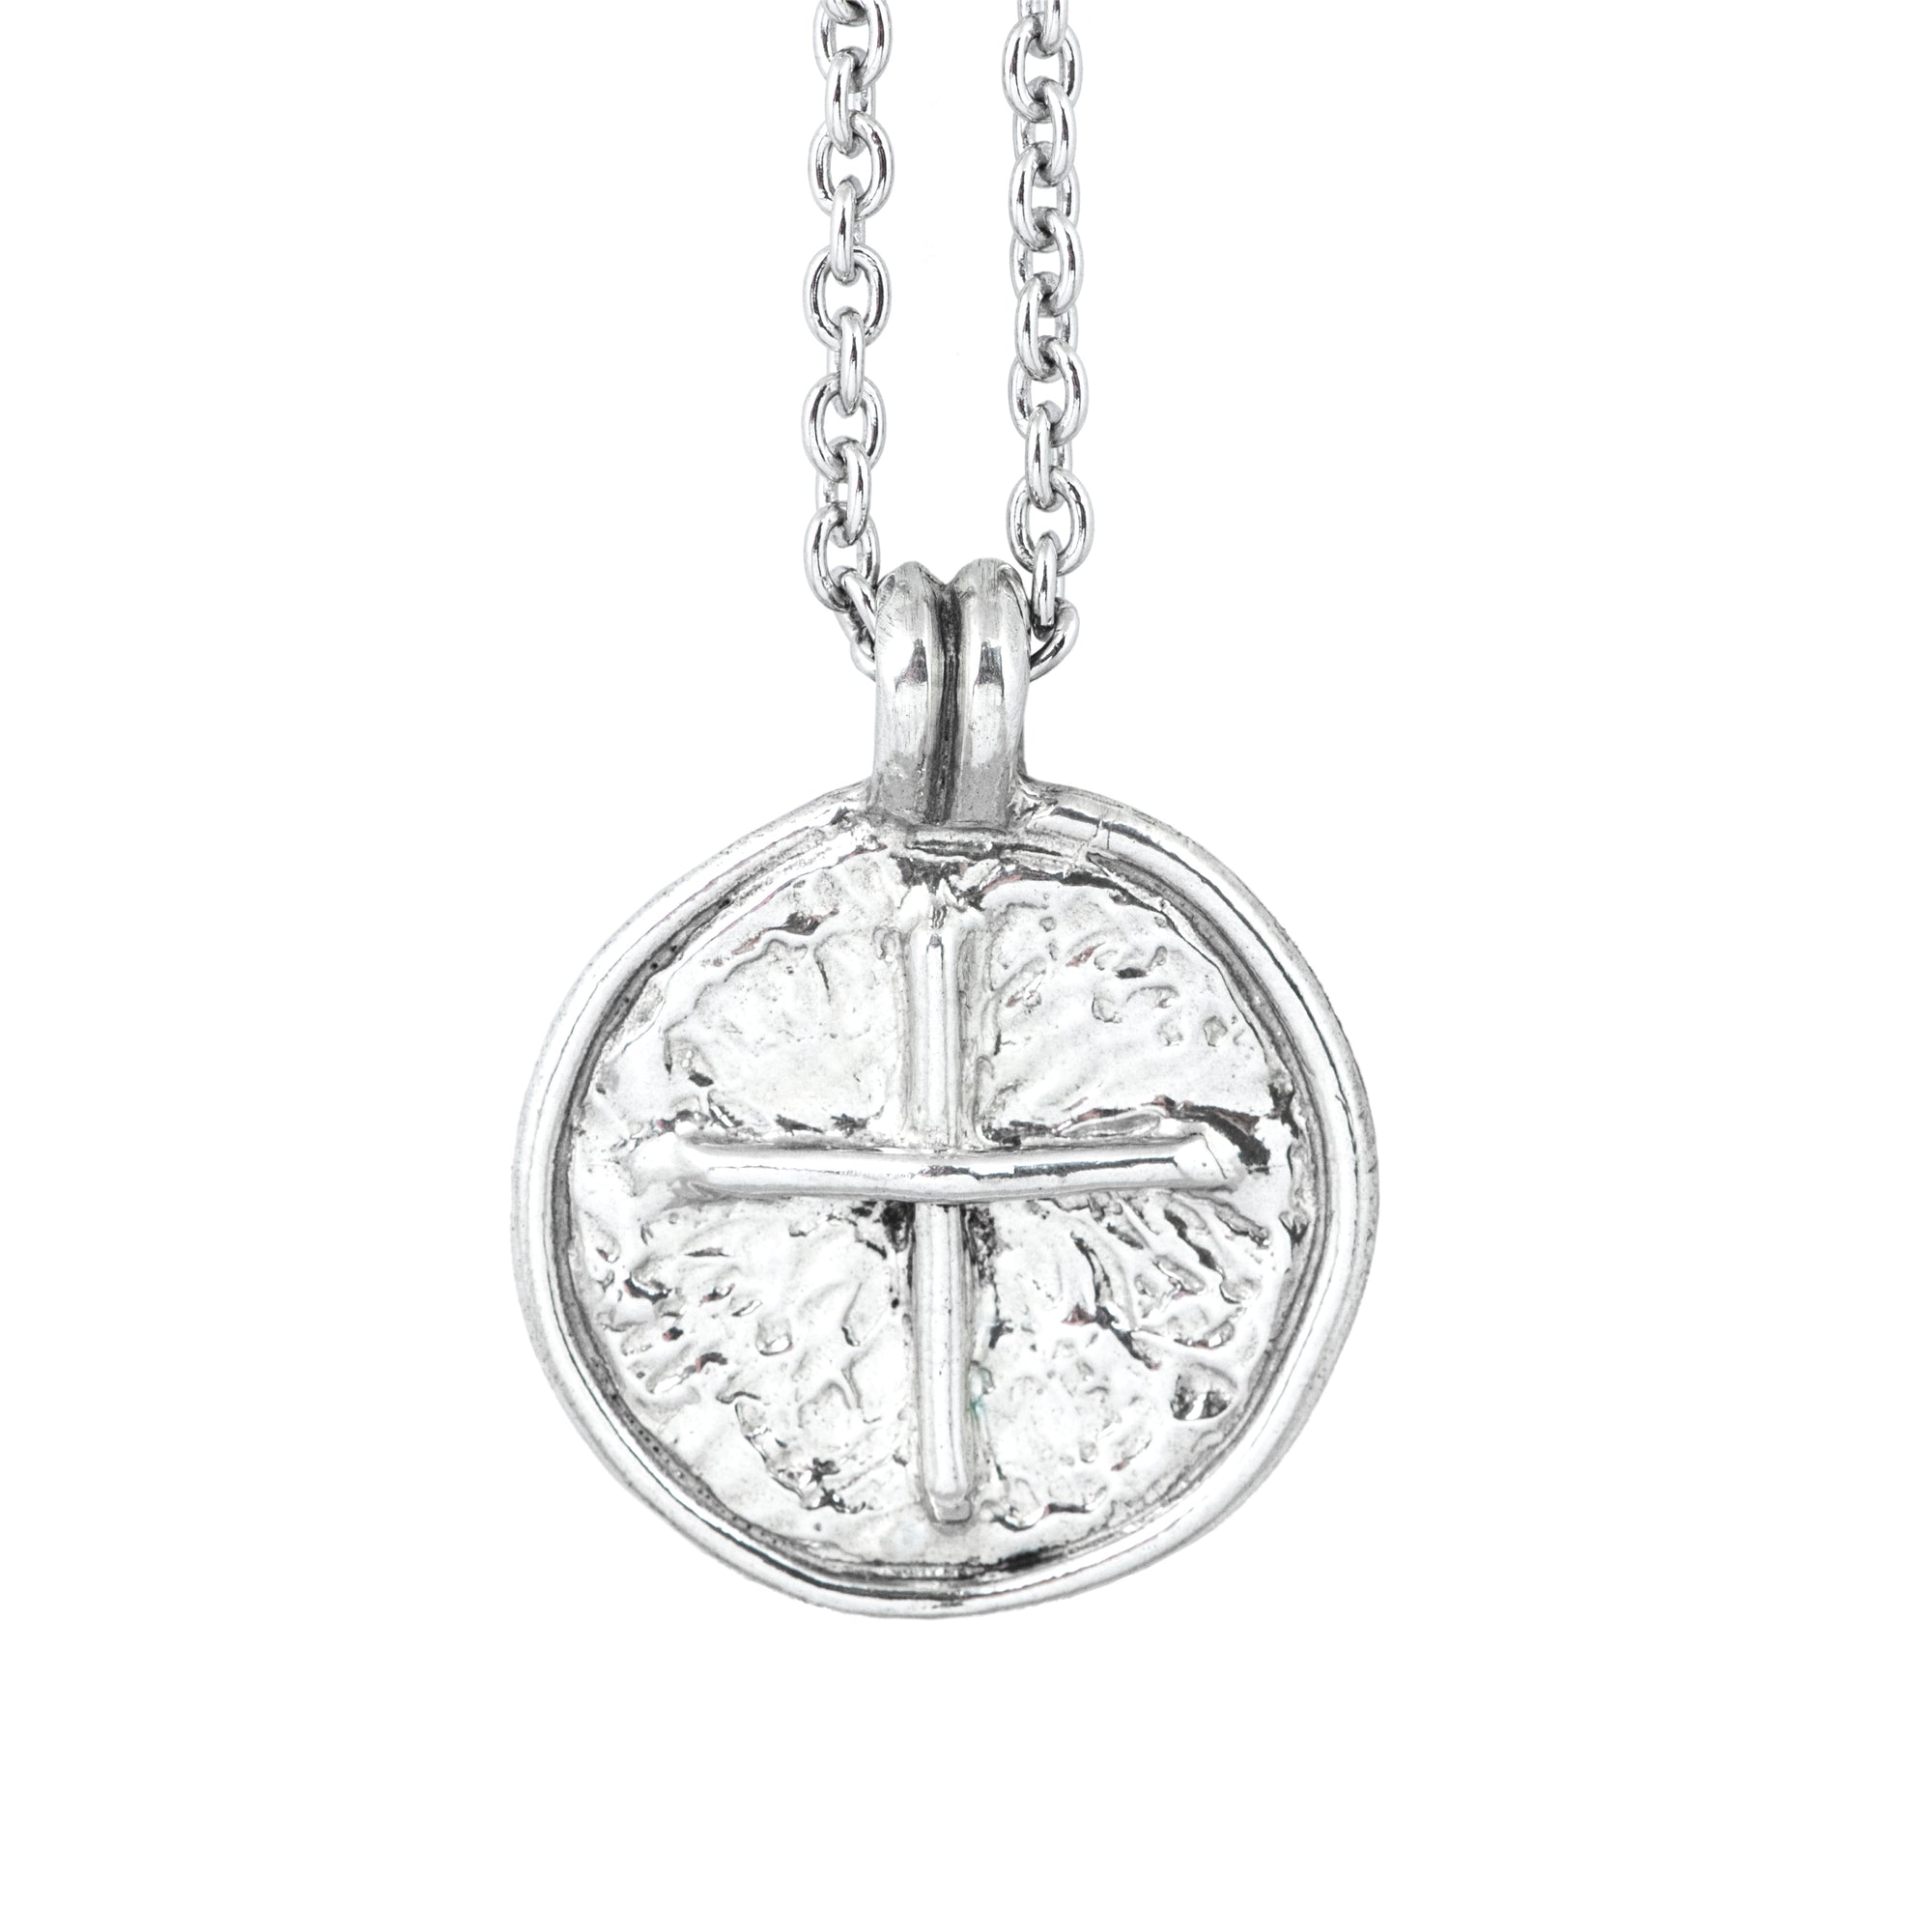 Silver medal cross with cable silver chain. Cristina Tamames Jewelry Designer.